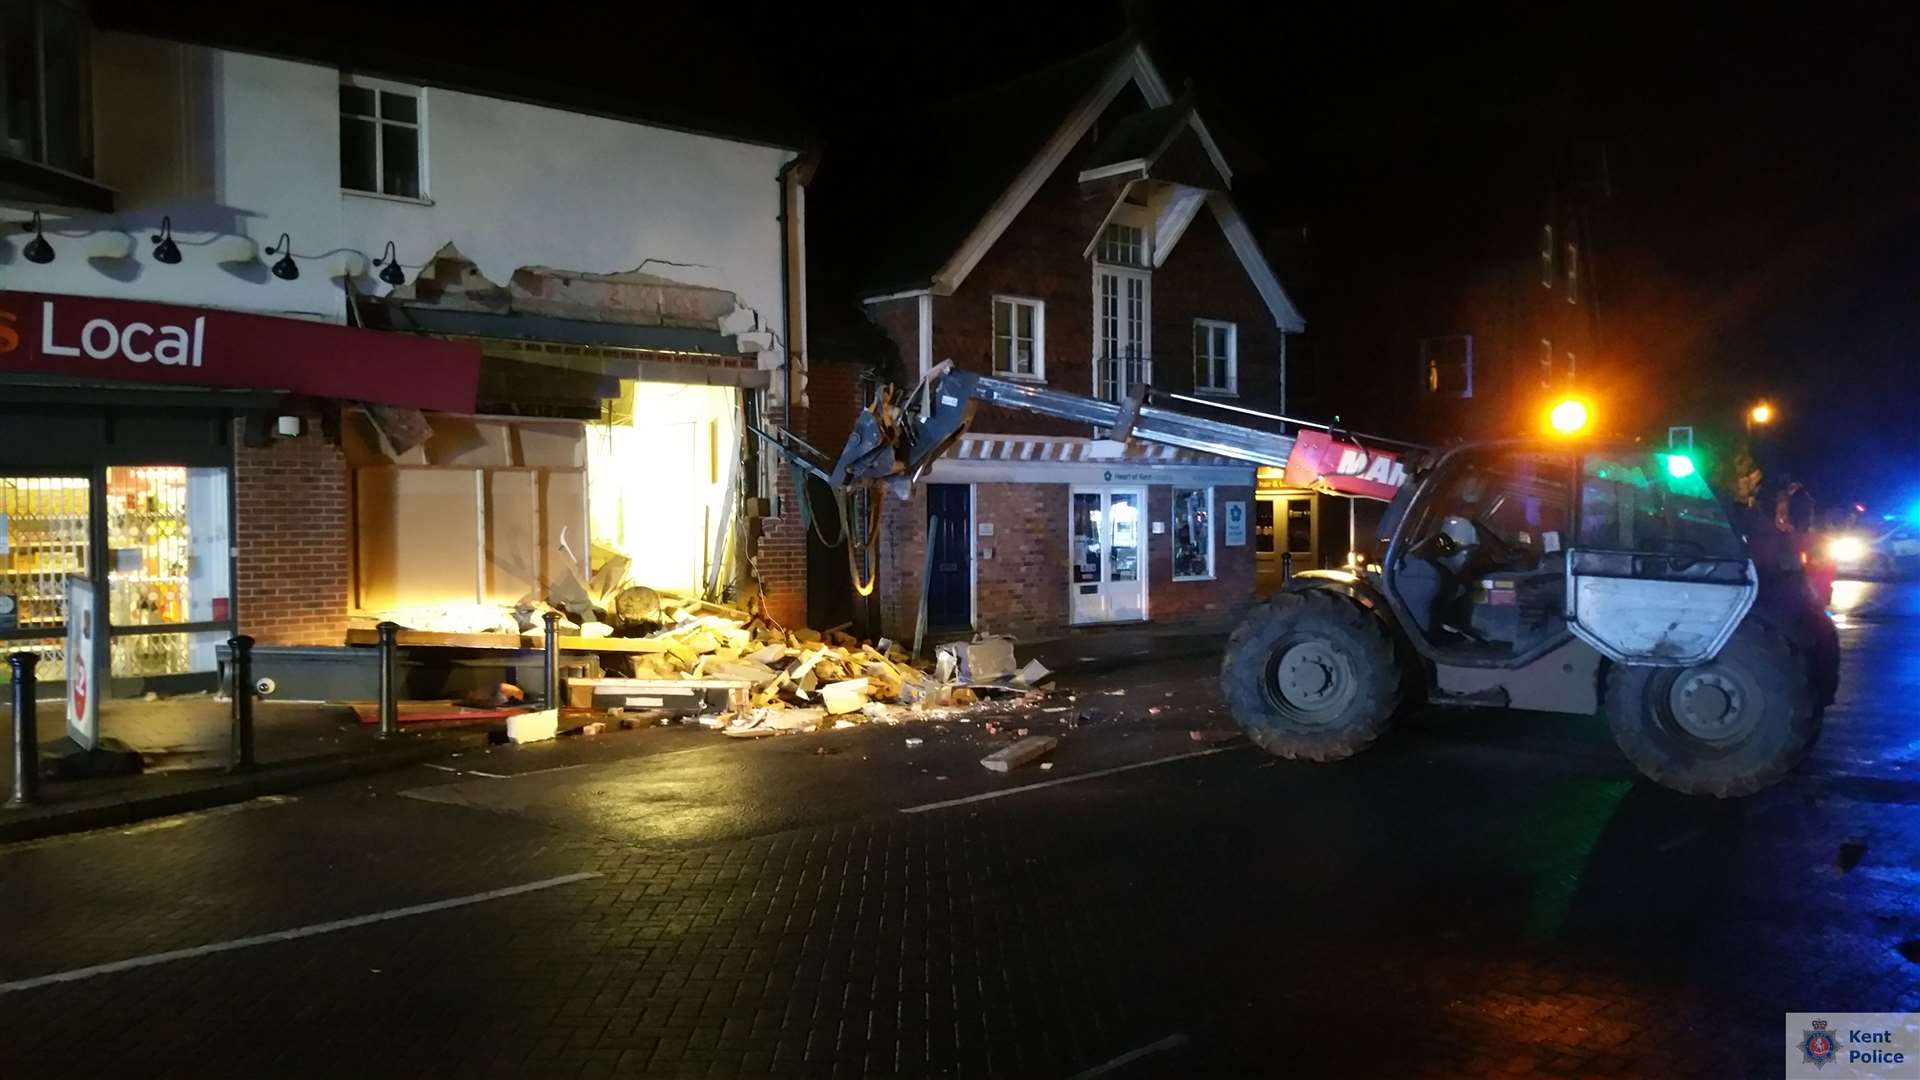 A large industrial vehicle was used to rip the cash machine out of the wall in Sainsburys Local, Headcorn